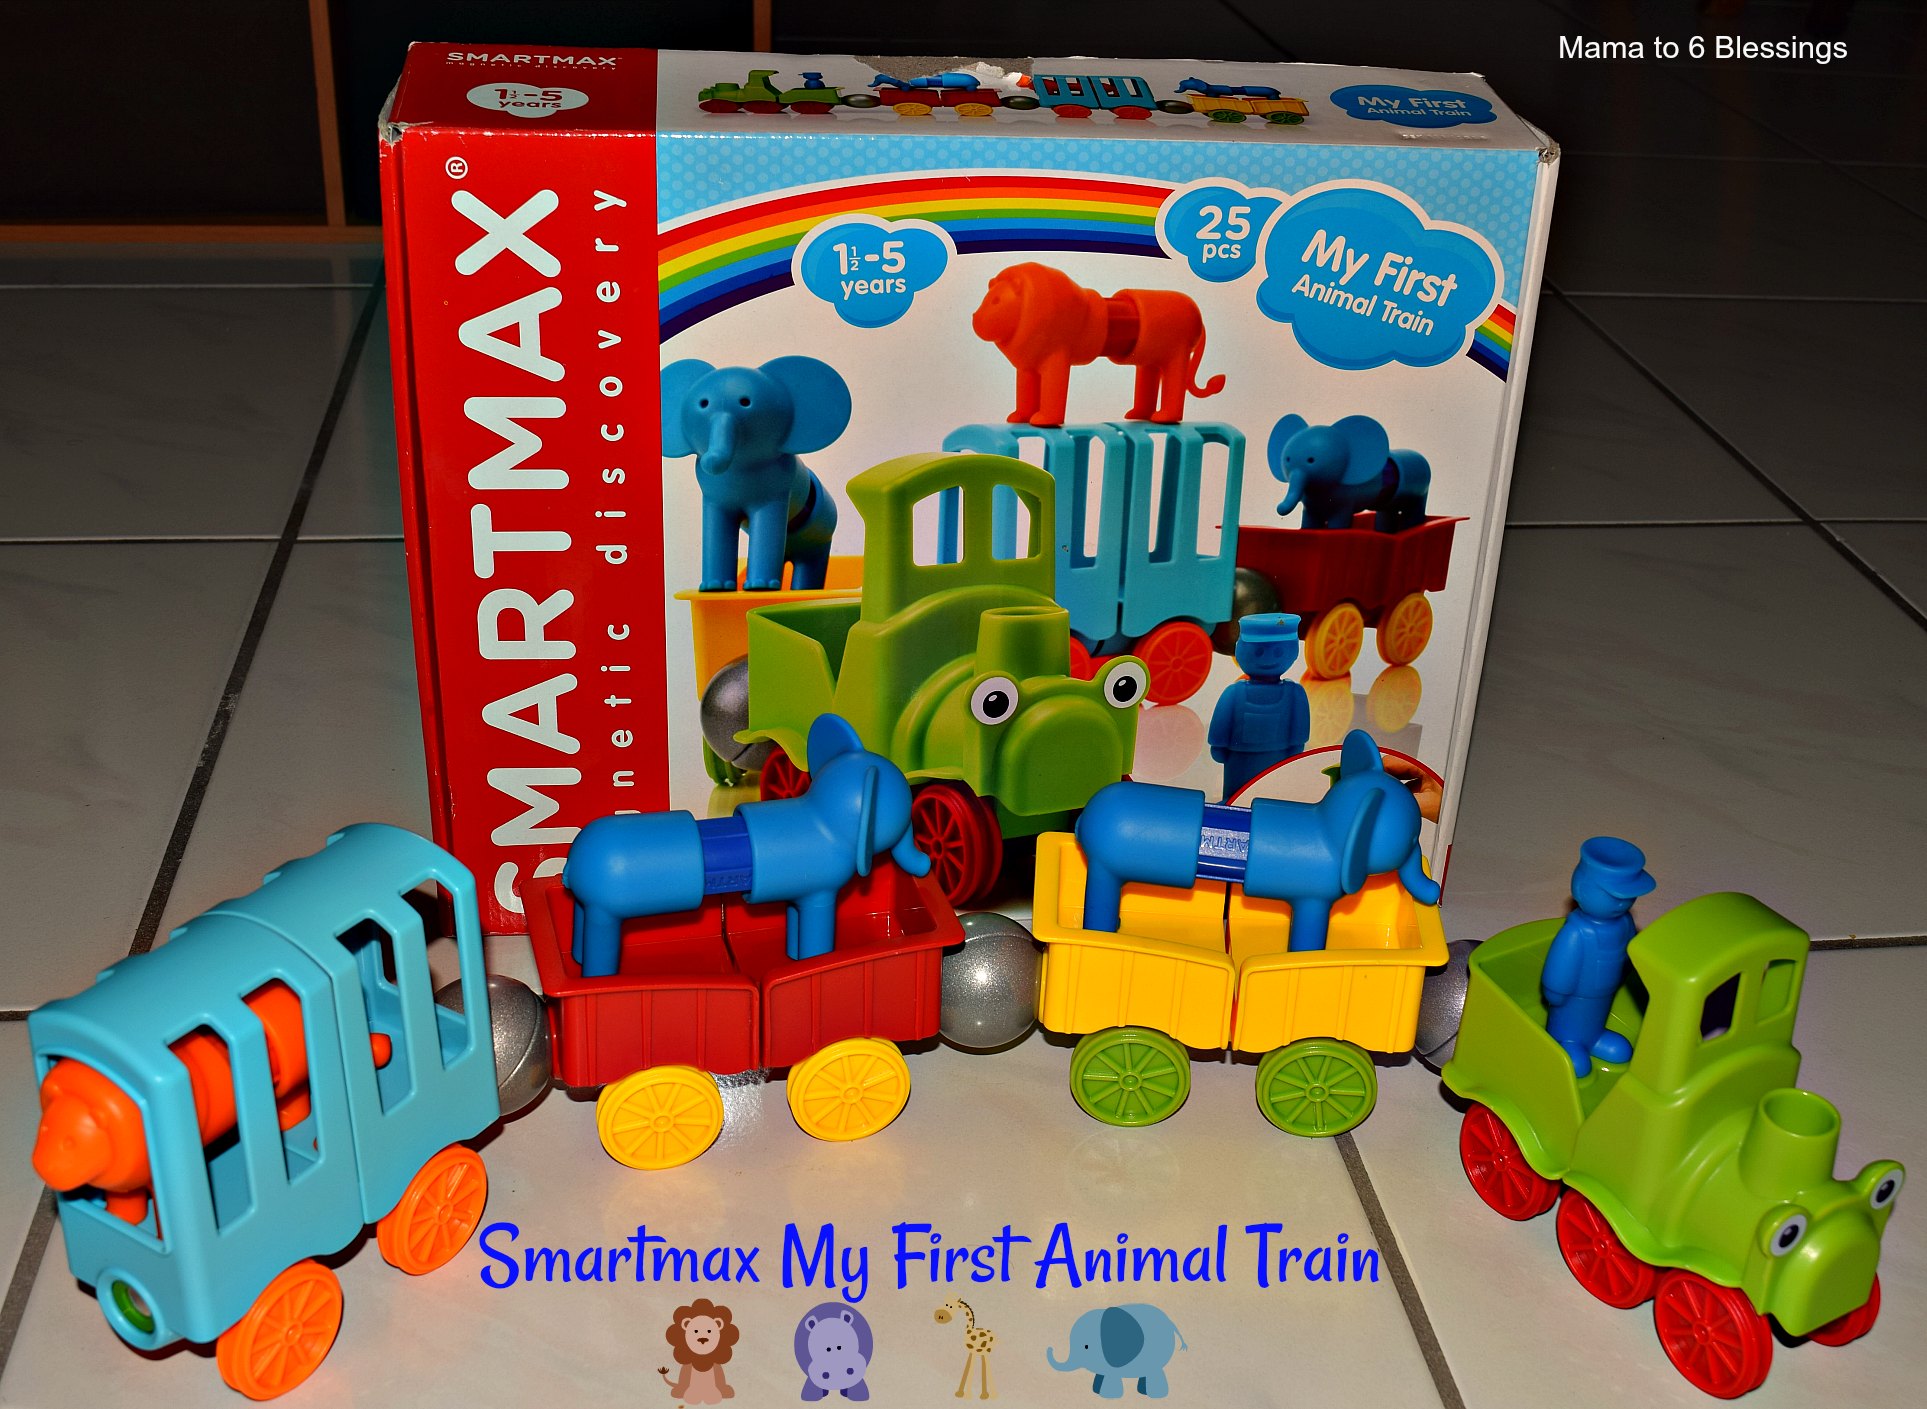 Magnetic Fun With The Smartmax My First Animal Train Toy & Giveaway - Mama  to 6 Blessings